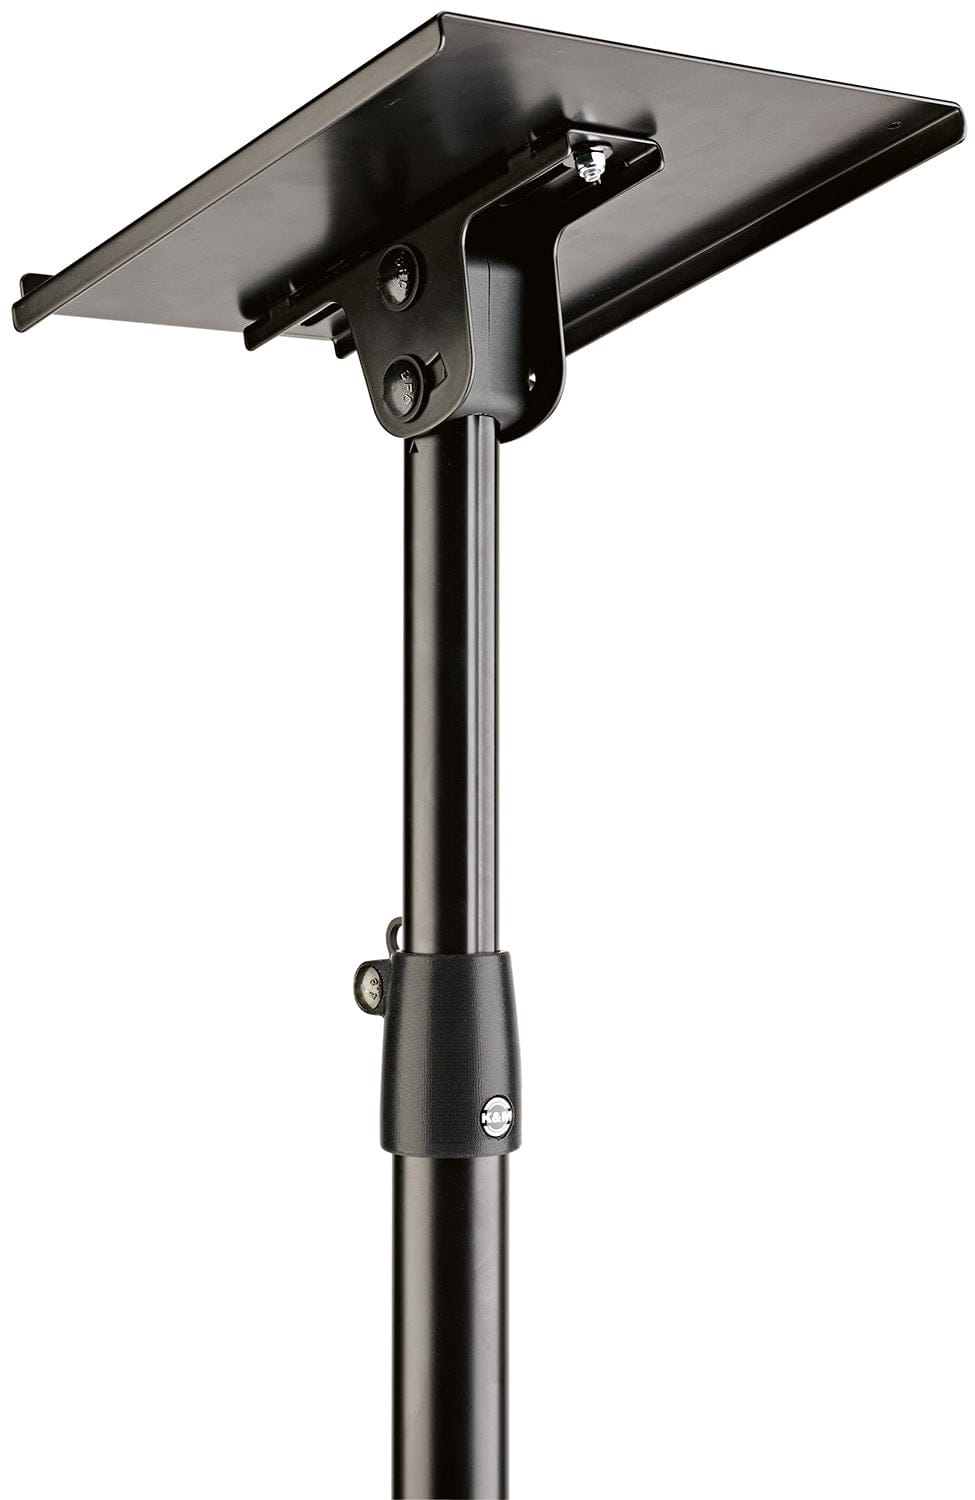 K&M 26754.000.55 Monitor Stand with Tiltable Tray and a Metal Tripod Base - Black - PSSL ProSound and Stage Lighting